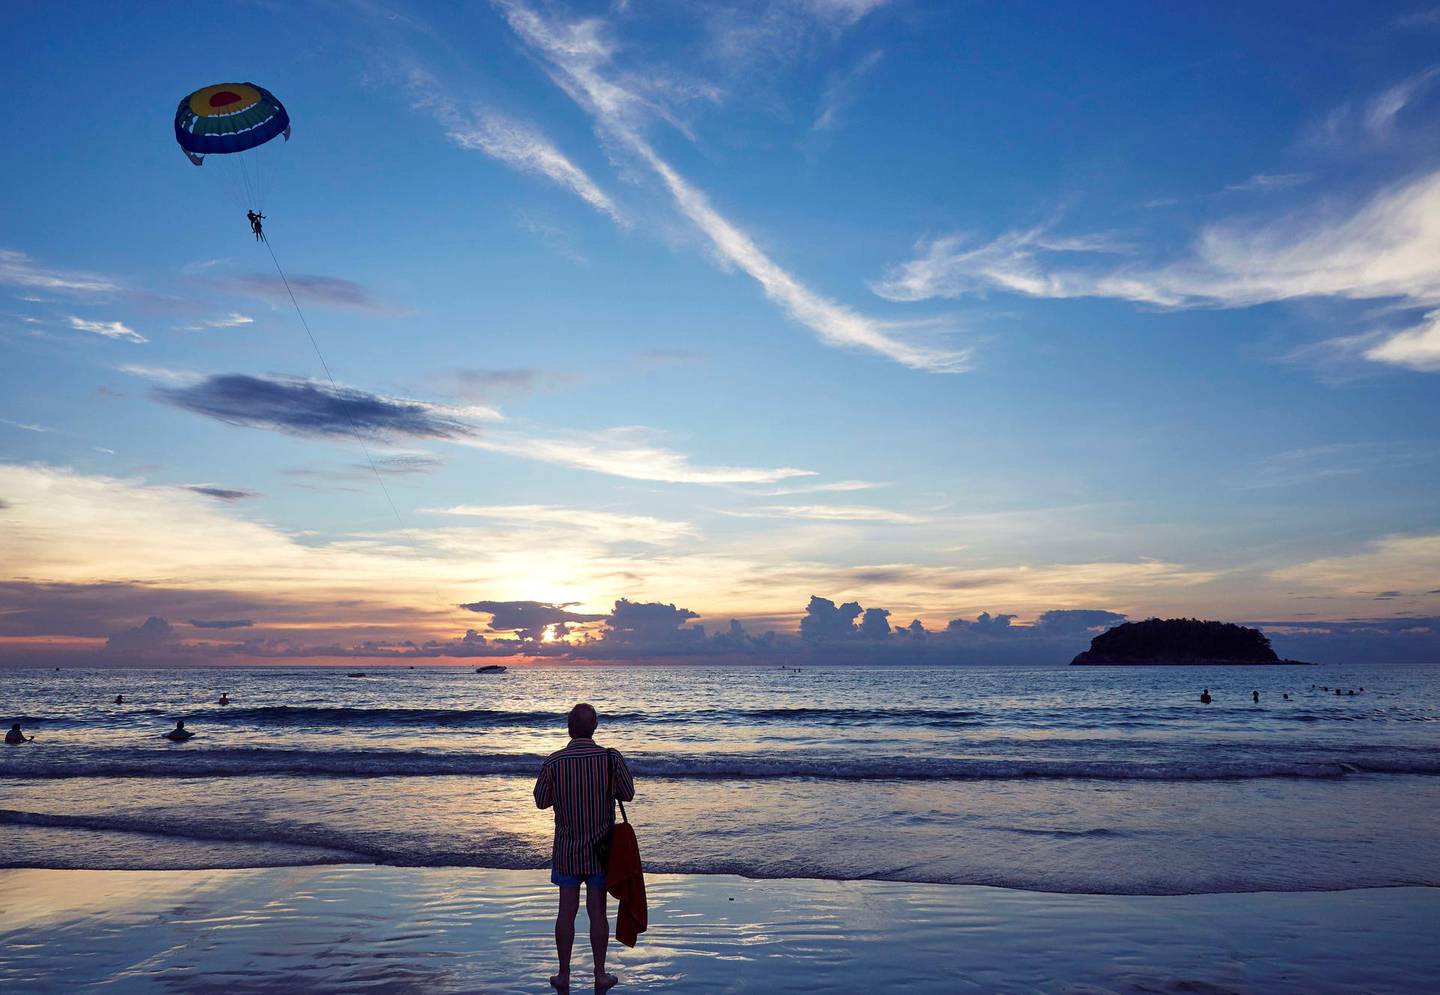 KATA BEACH, PHUKET, THAILAND - 2017/11/21: A beachgoer watches parasailing off the beach in Phuket. Tourists can take short parasailing flights from the beach out toward the small island, Koh Pu, and back again.  Phuket attracts more than 5 million tourists each year who flock there for it's picturesque beaches. (Photo by Craig Ferguson/LightRocket via Getty Images)